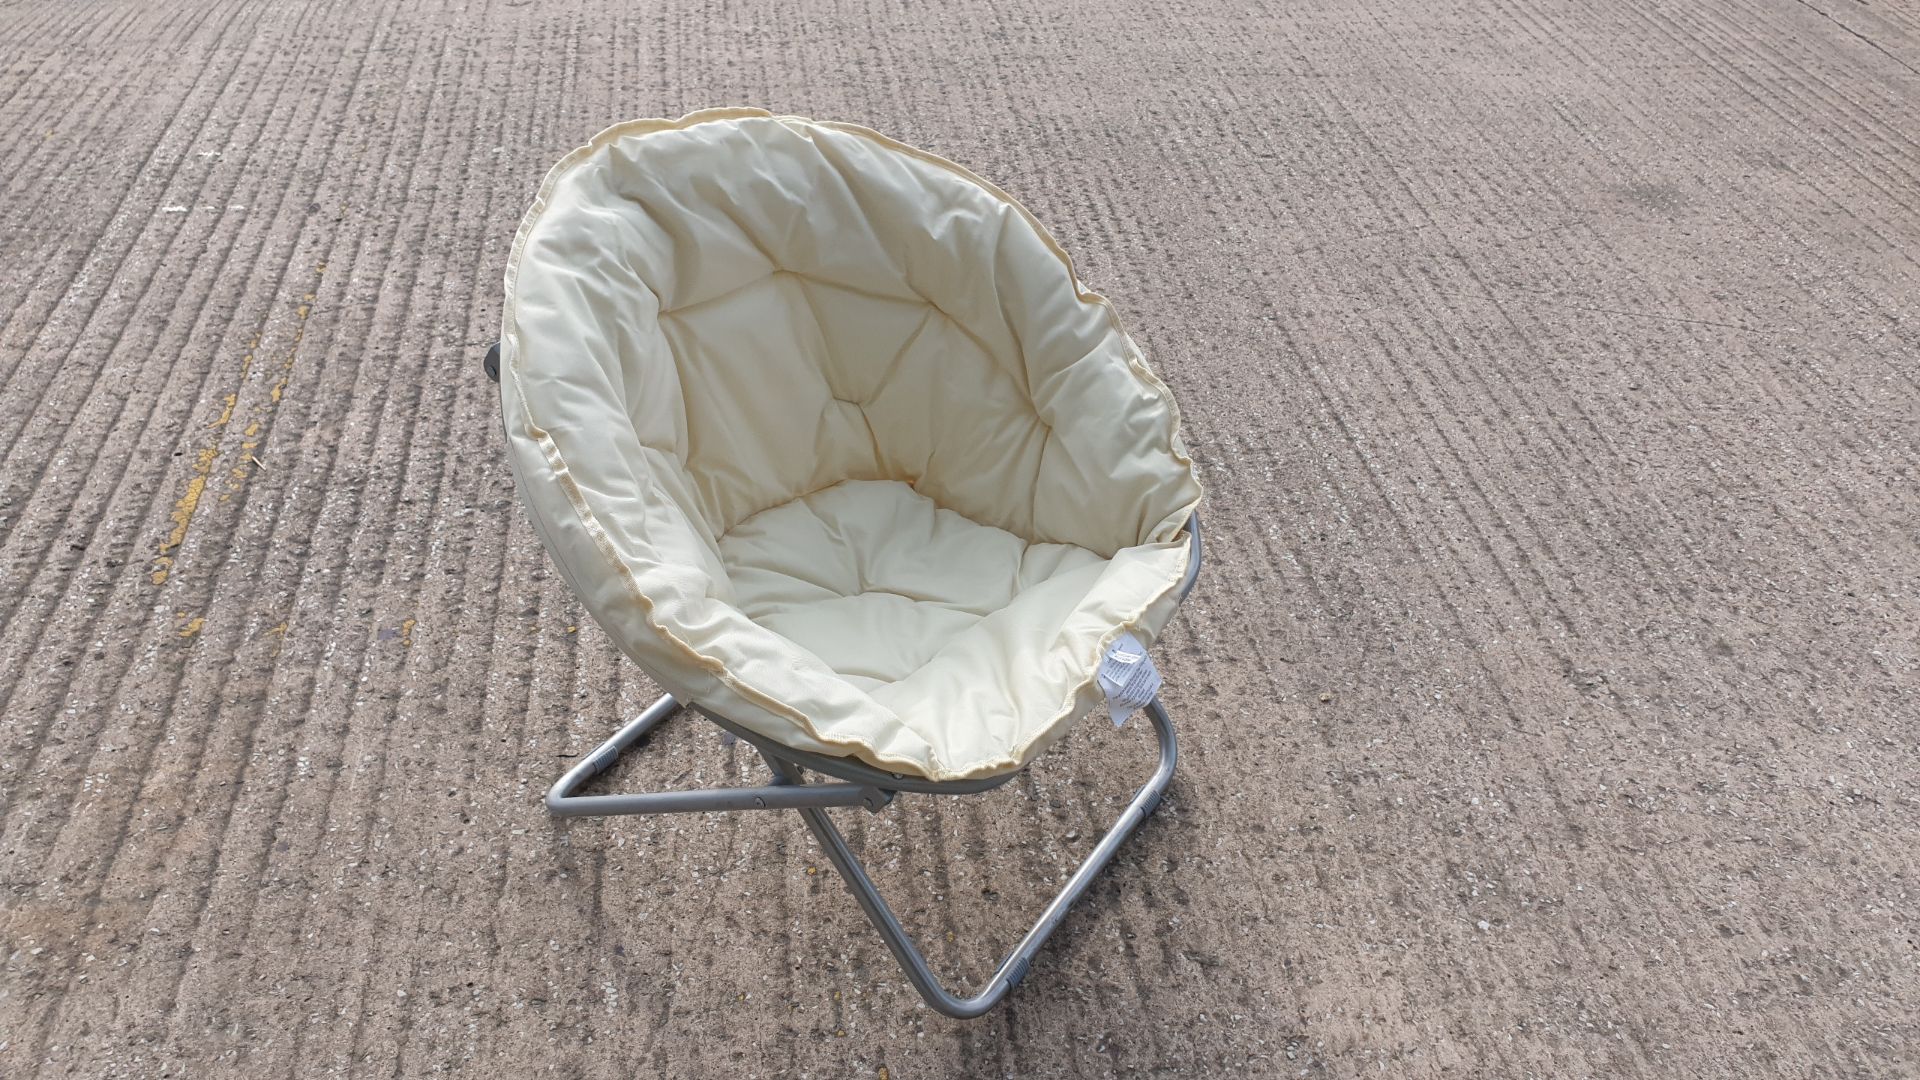 12 X CREAM GARDEN BUCKET CHAIRS - METAL FRAME WITH 100% POLYESTER SEATING COVER - IN 3 CARTONS (EACH